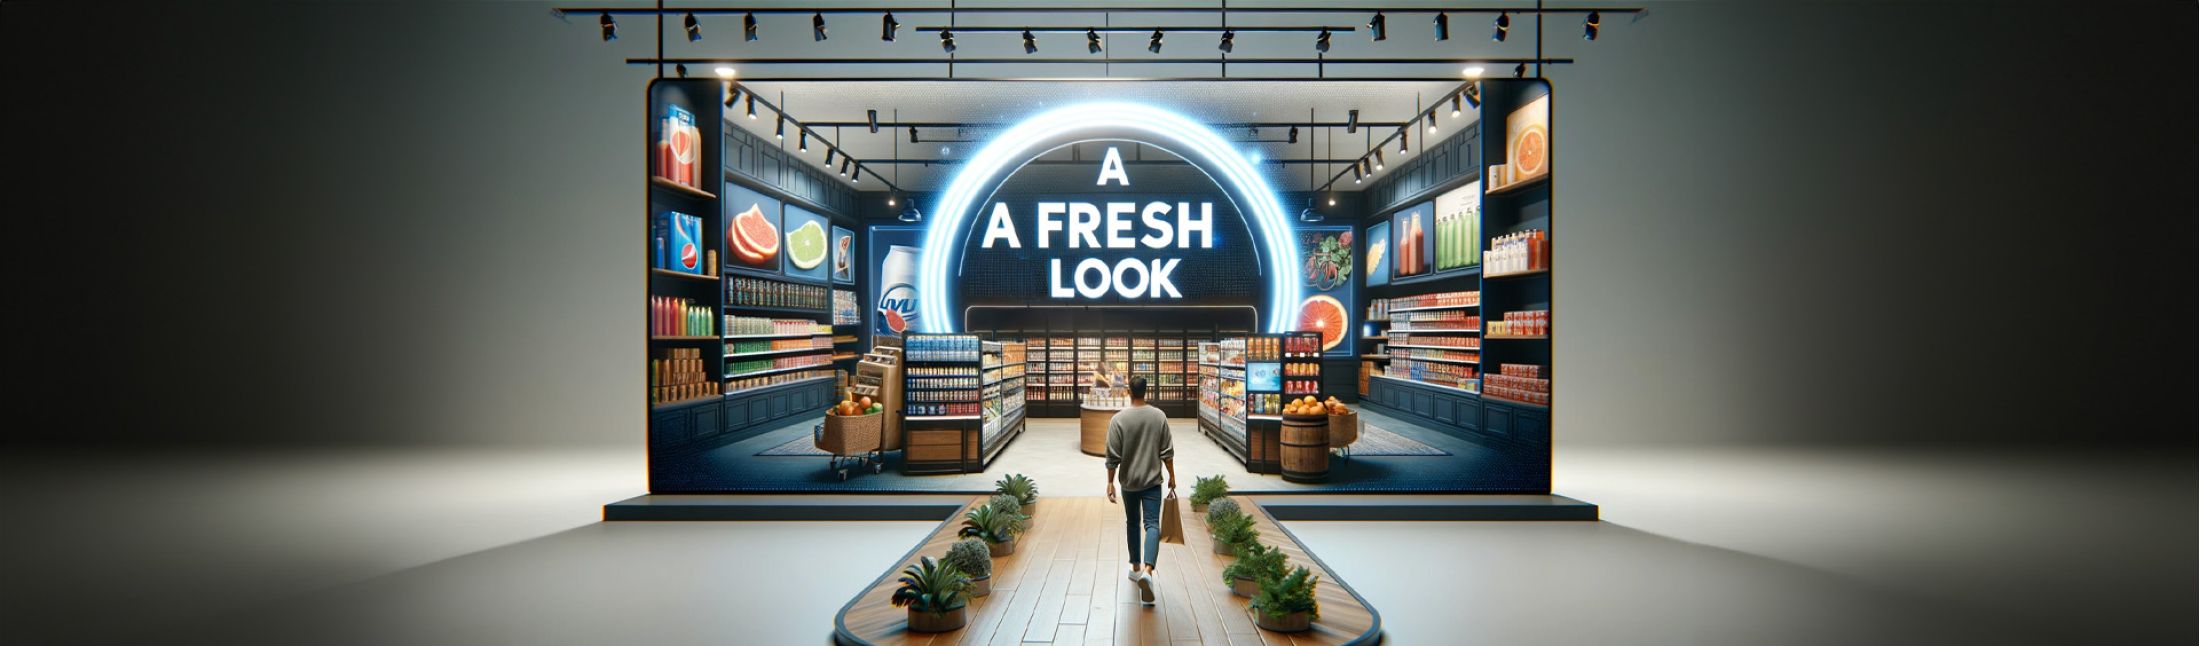 A Fresh Look: Revitalizing Brands and Redefining the Buyer's Journey